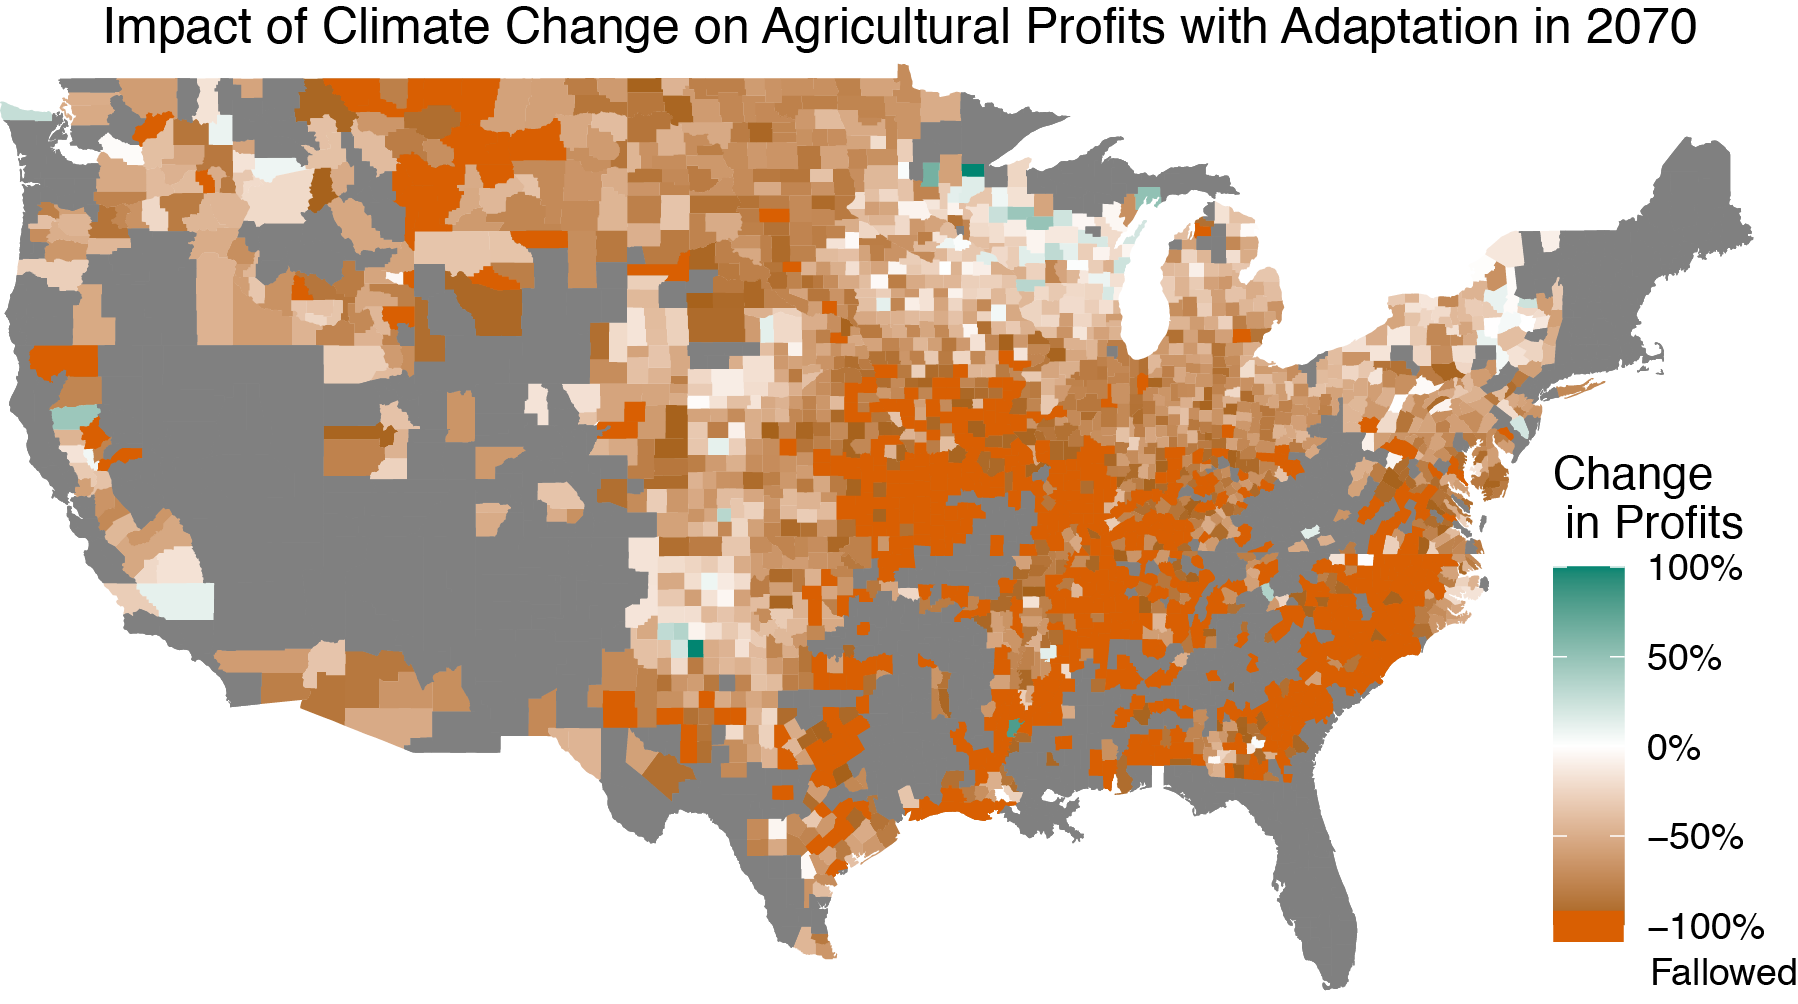 Crop switching reduces agricultural losses from climate change in the